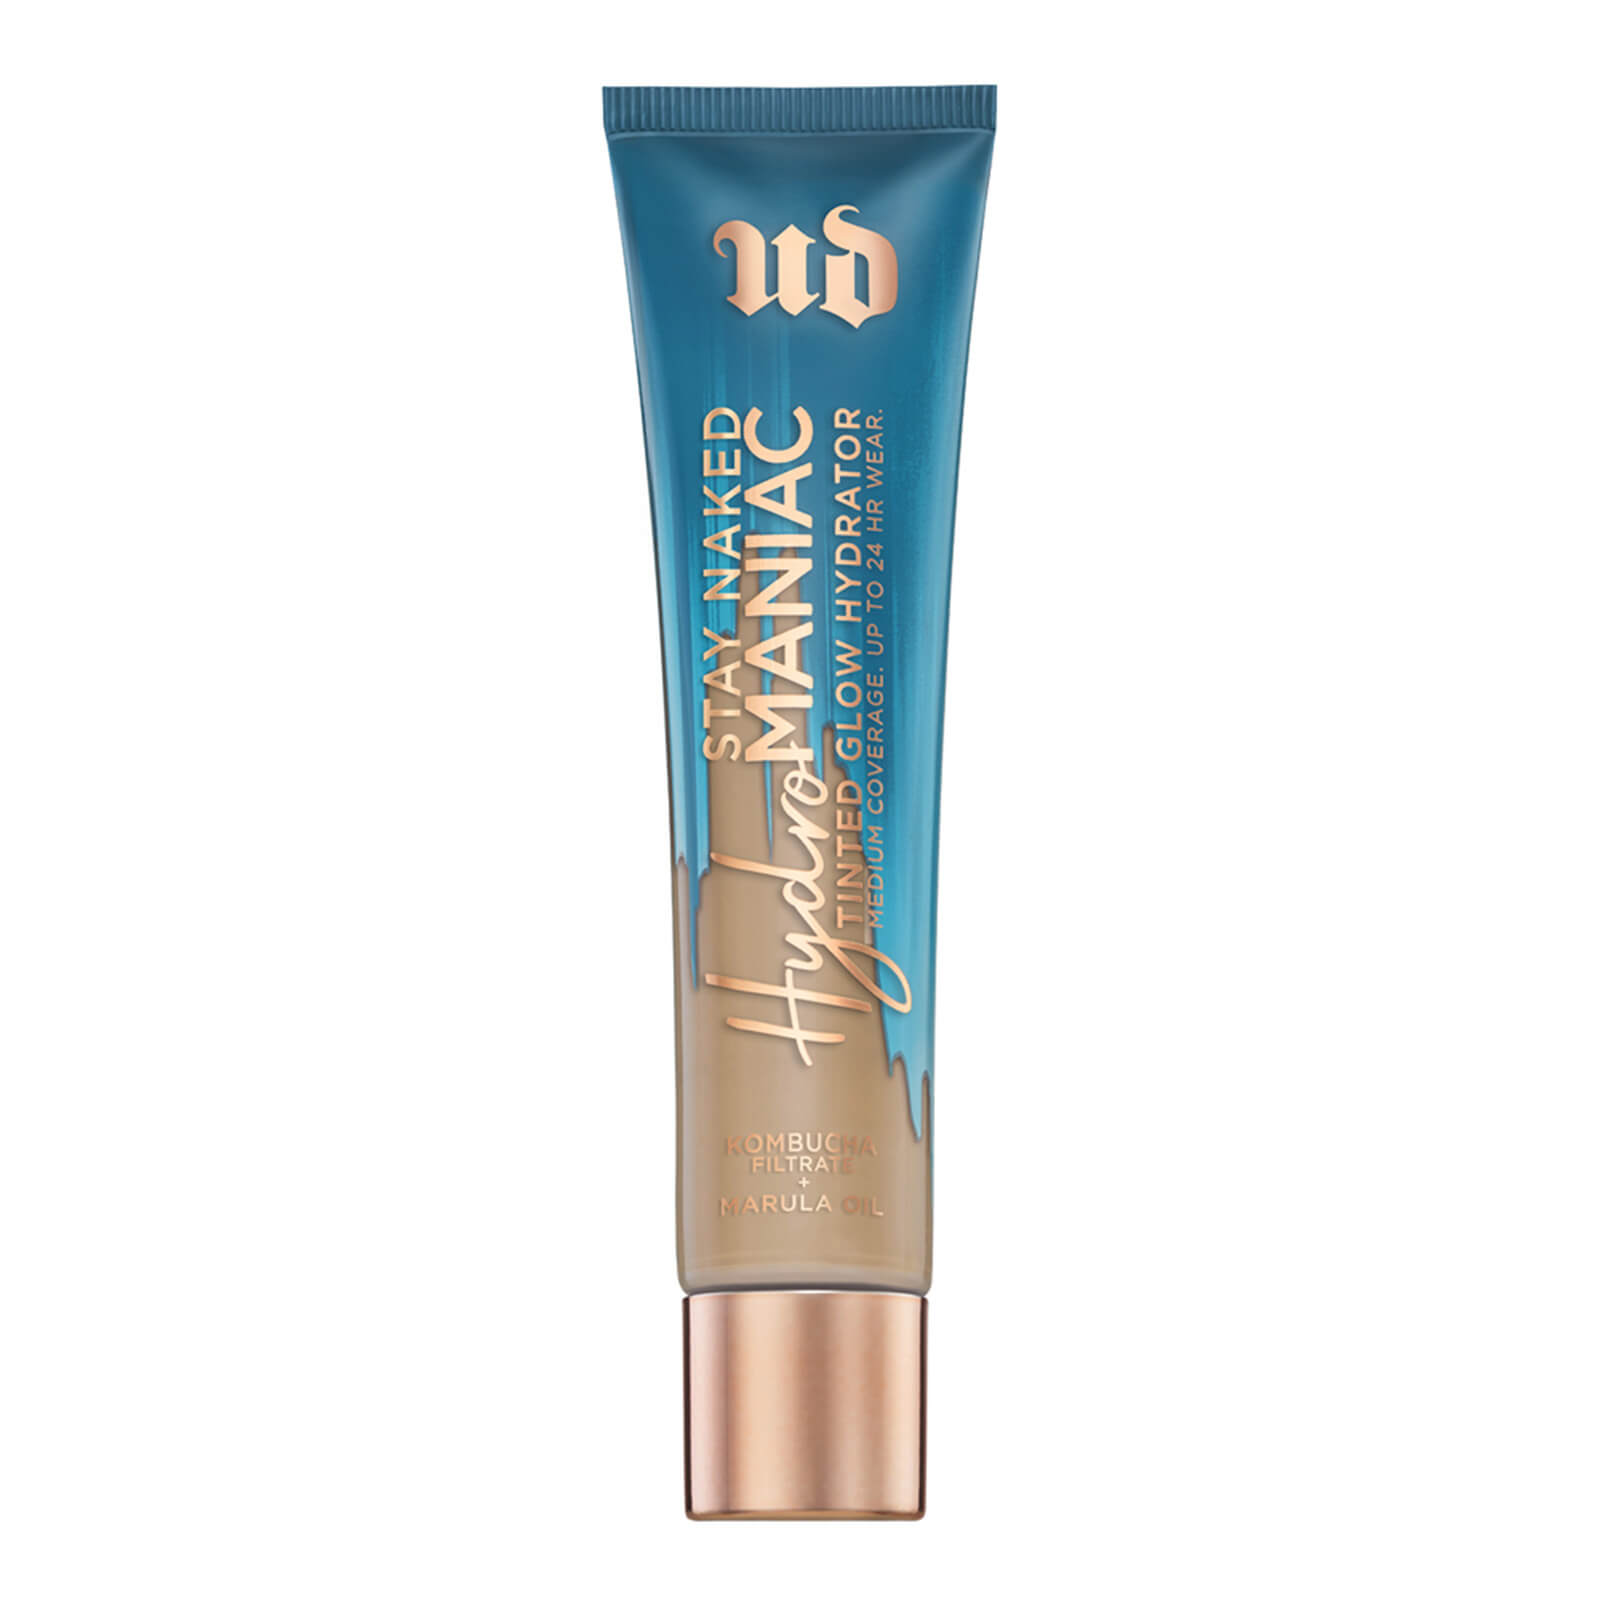 Image of Urban Decay Stay Naked Hydromaniac Tinted Glow Hydrator 35ml (Various Shades) - 41